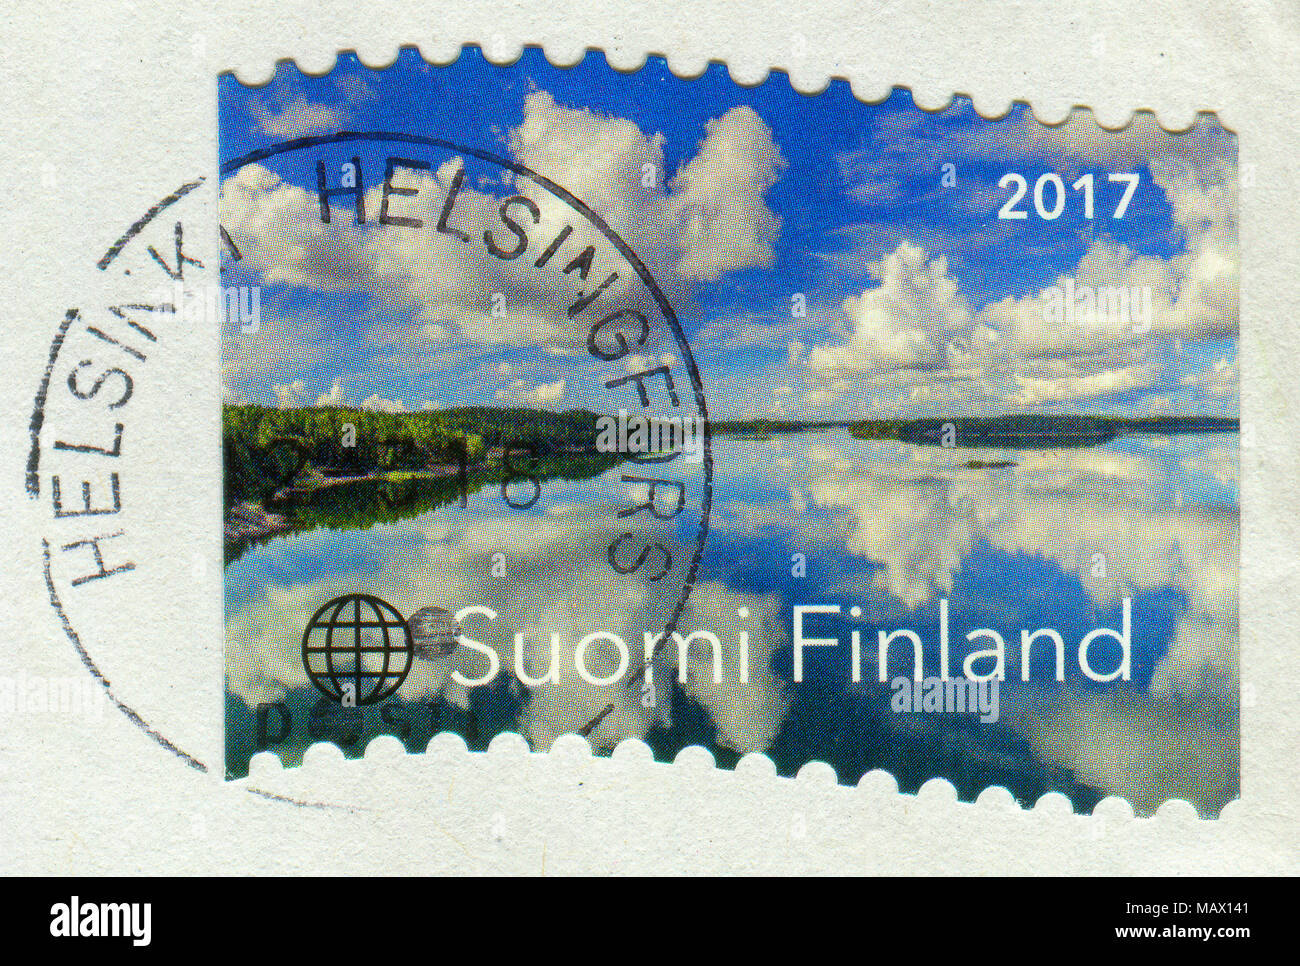 GOMEL, BELARUS, 8 DECEMBER 2017, Stamp printed in Finland shows image of the Nature Finland, circa 2017. Stock Photo